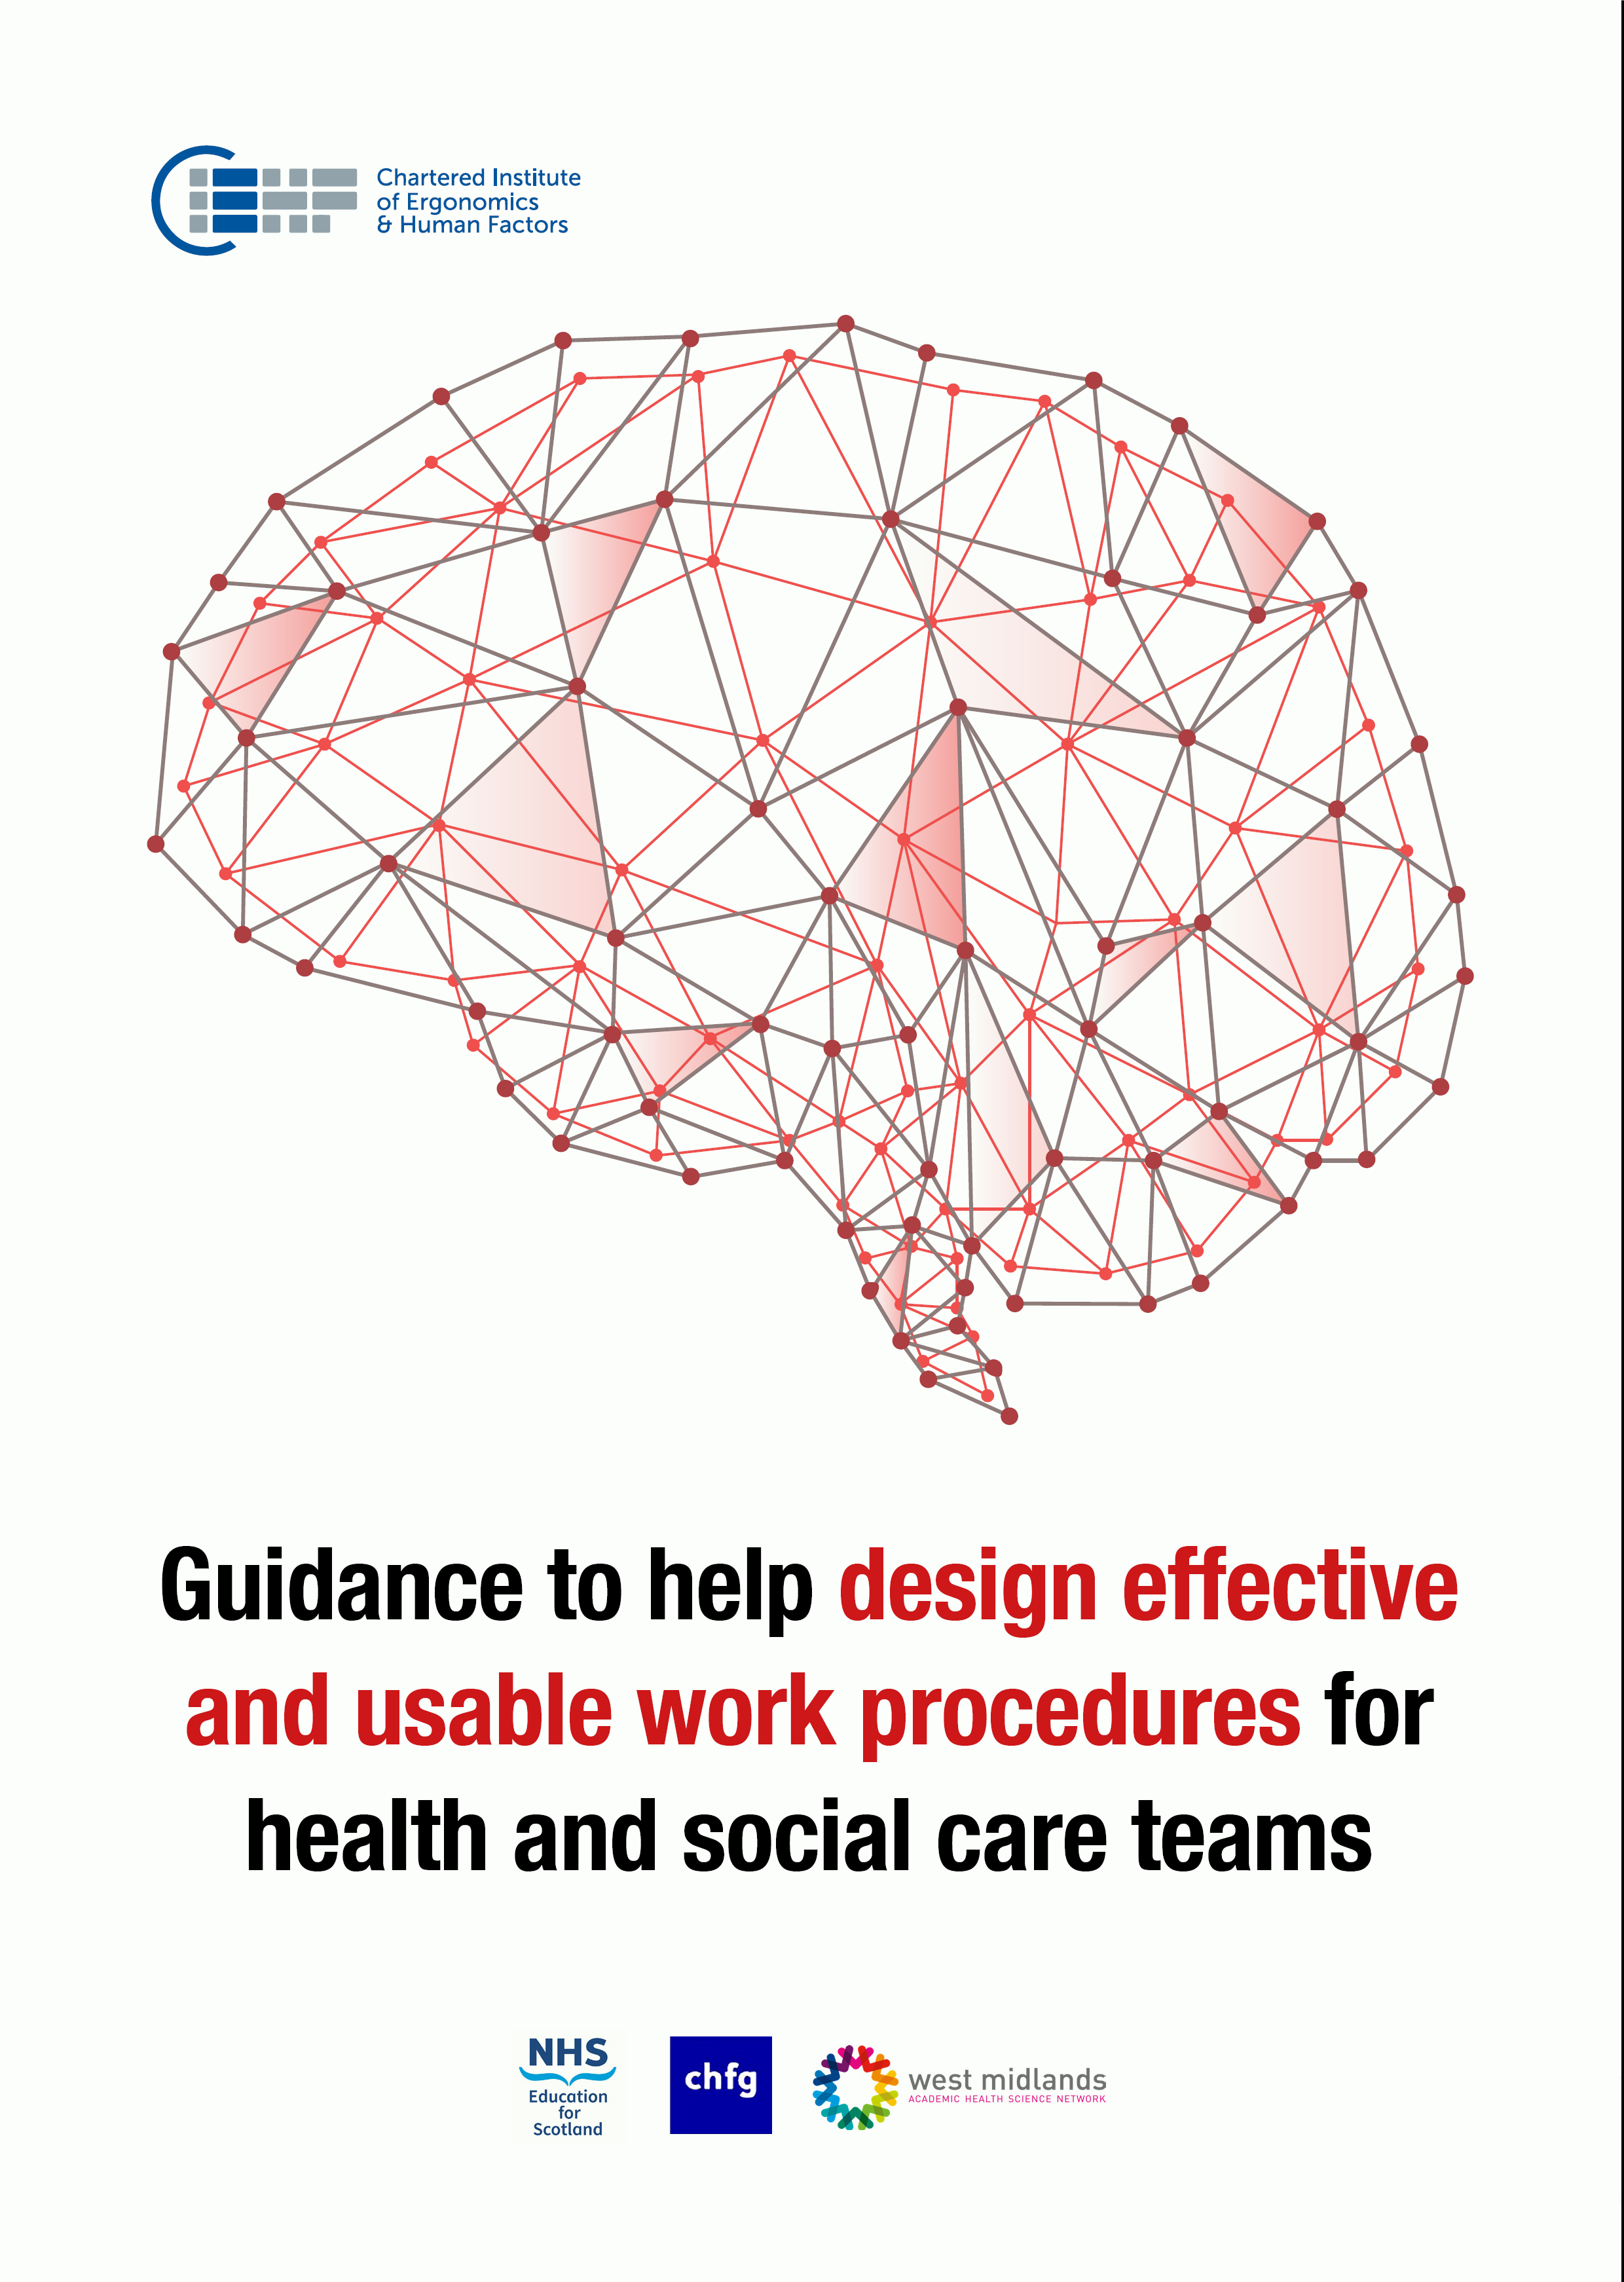 Guidance to help design effective and usable work procedures for health and social care teams